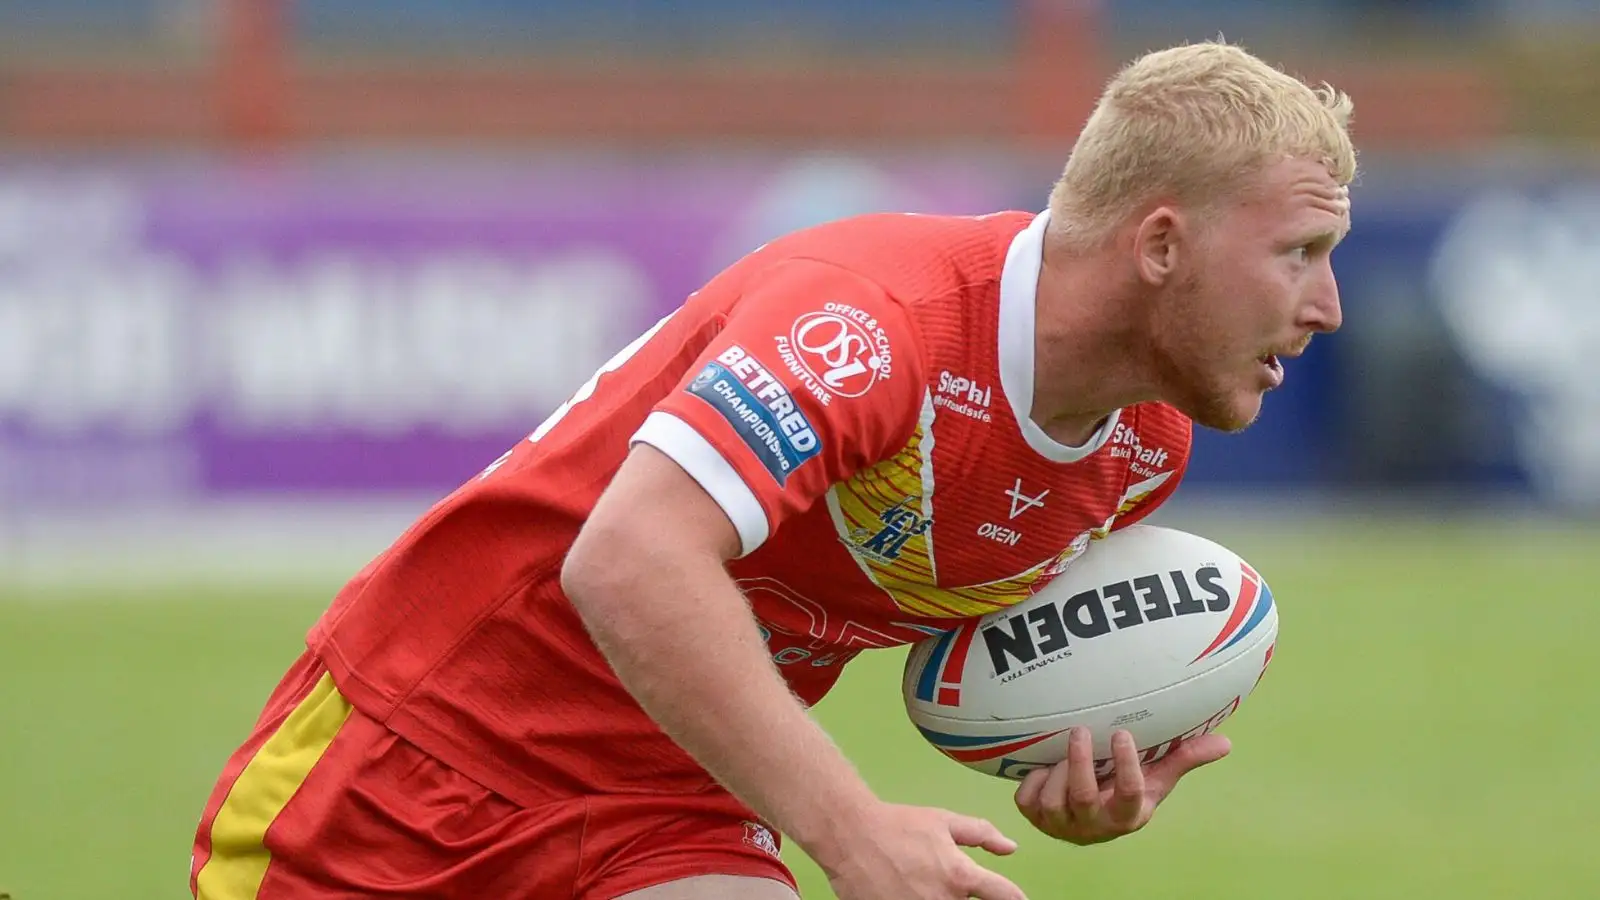 Former Super League youngster hit with huge drugs ban for ‘use and possession of a prohibited substance’